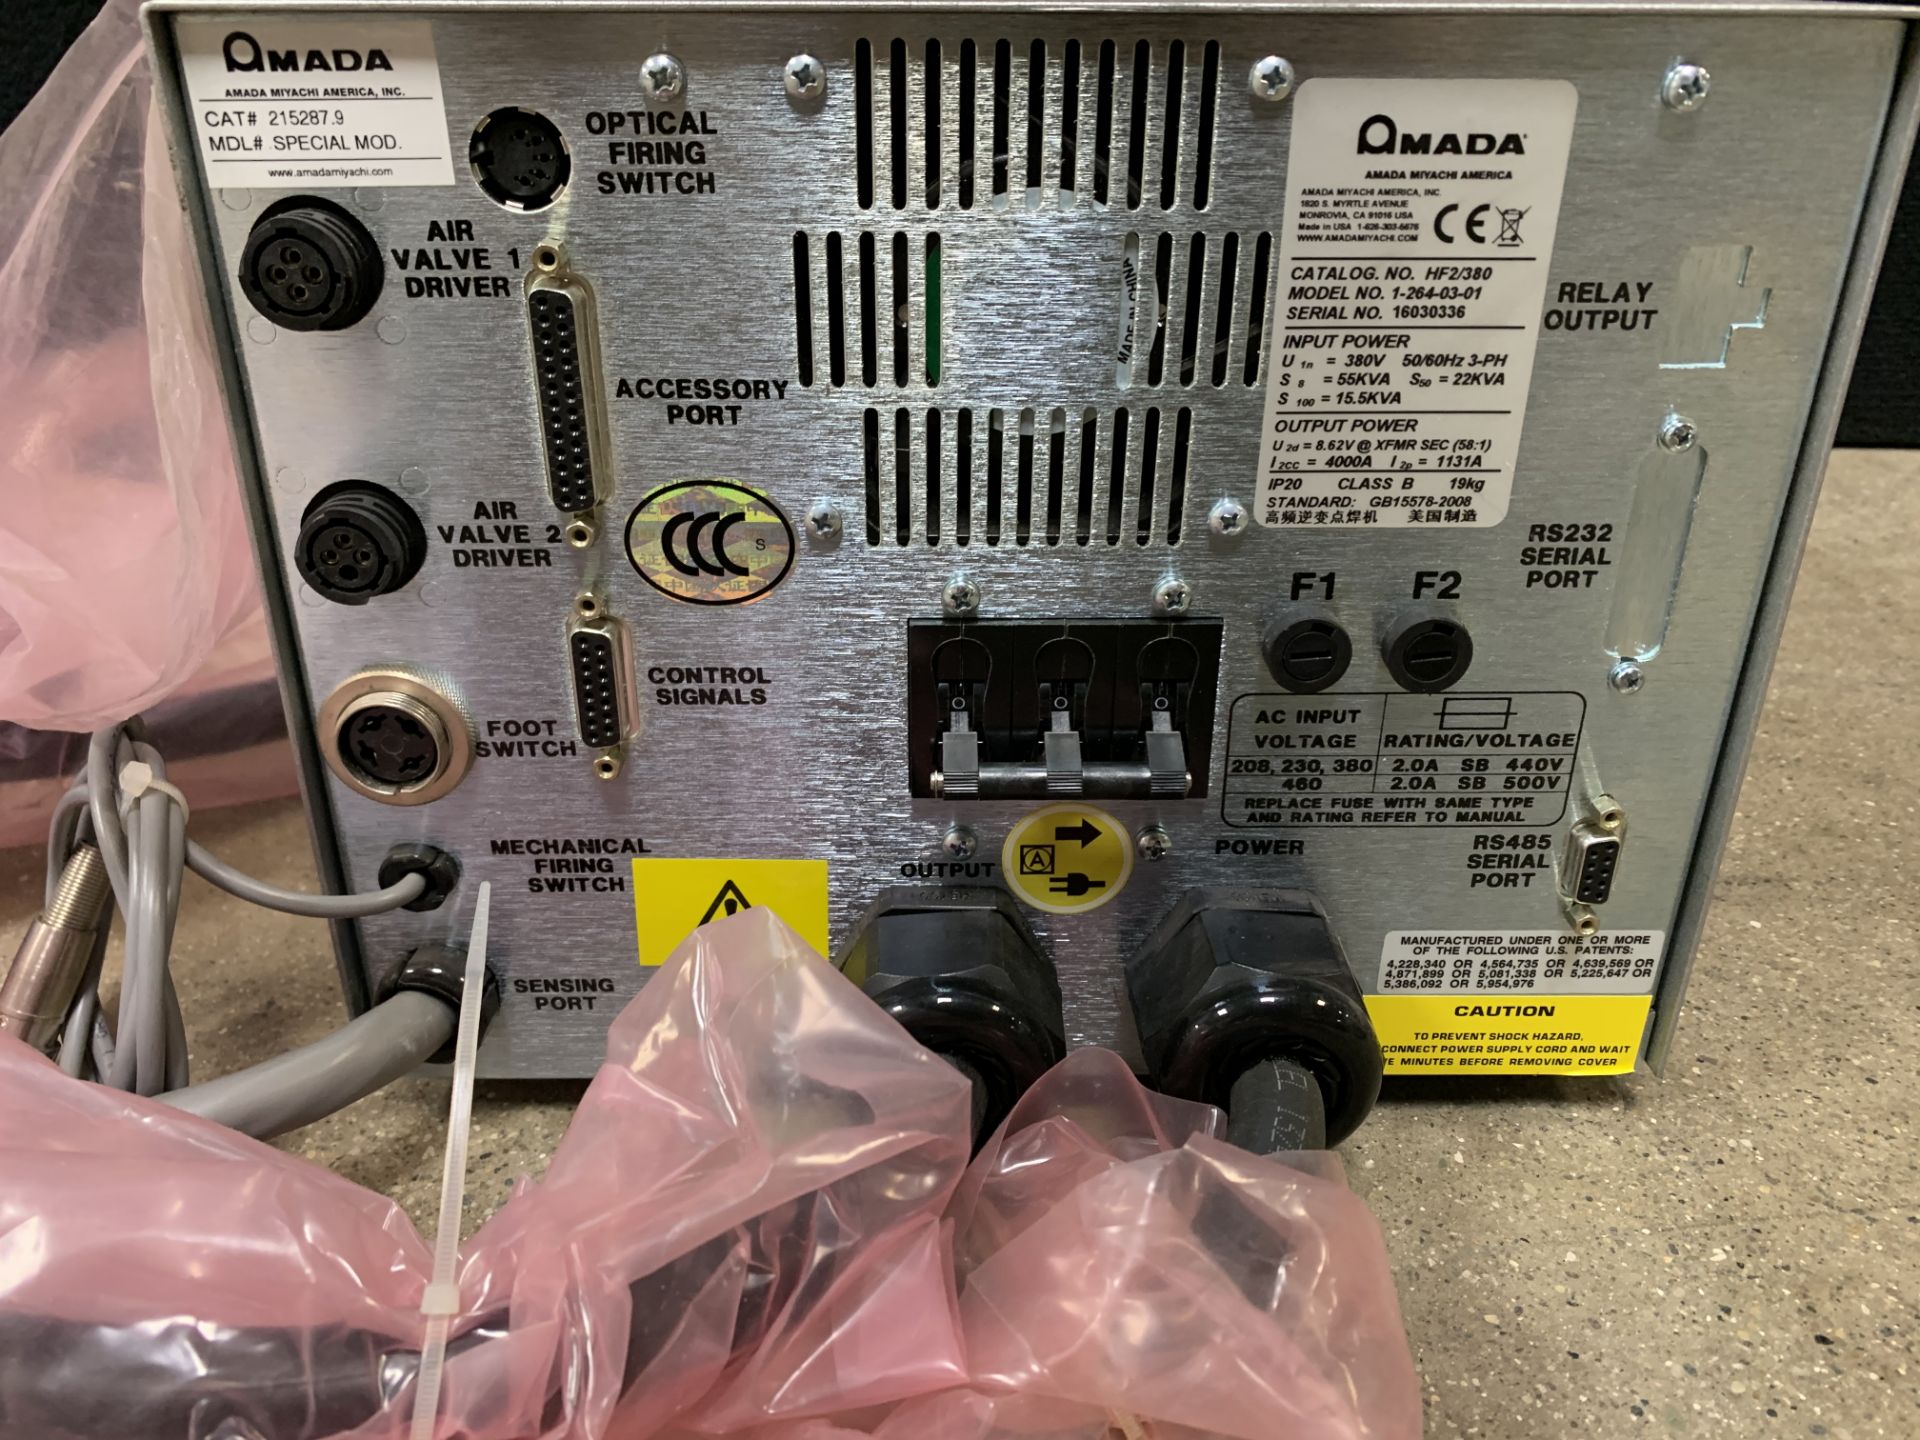 NEW OUT OF BOX - MIYACHI UNITEK HF2/380 HIGH FREQUENCY INVERTER WELDING CONTROL POWER SUPPLY 2KHZ - Image 3 of 6